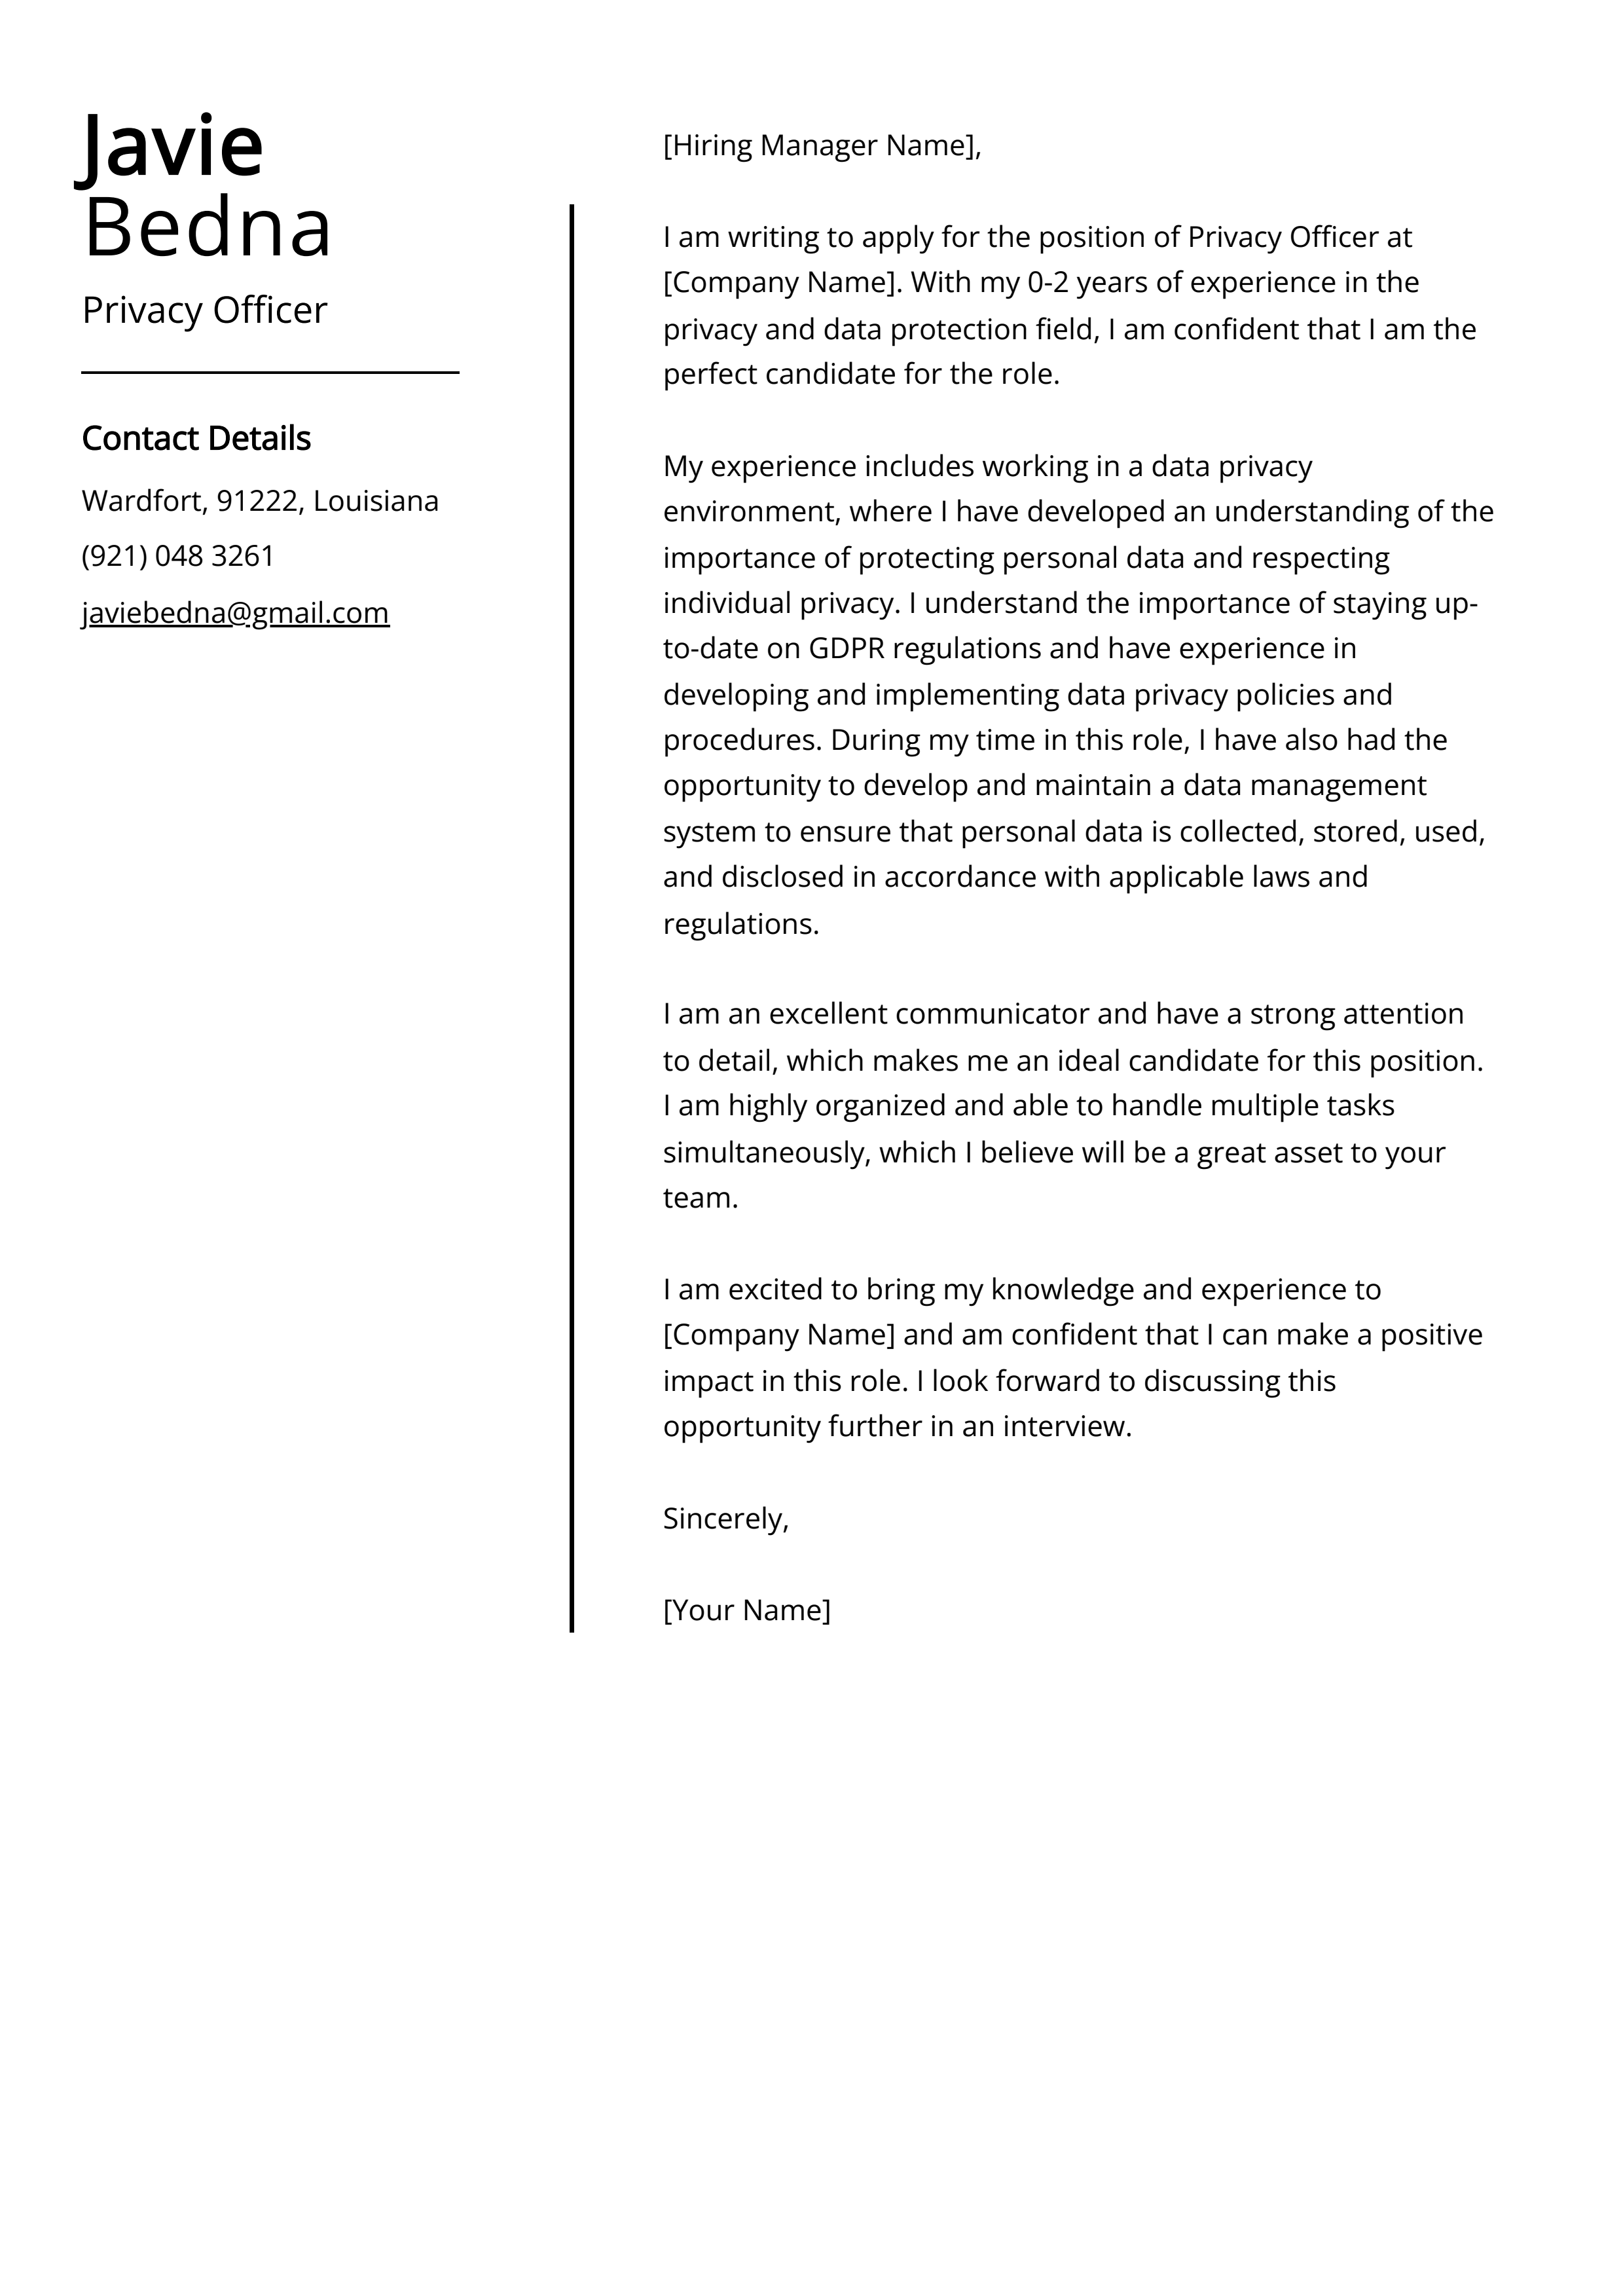 Privacy Officer Cover Letter Example